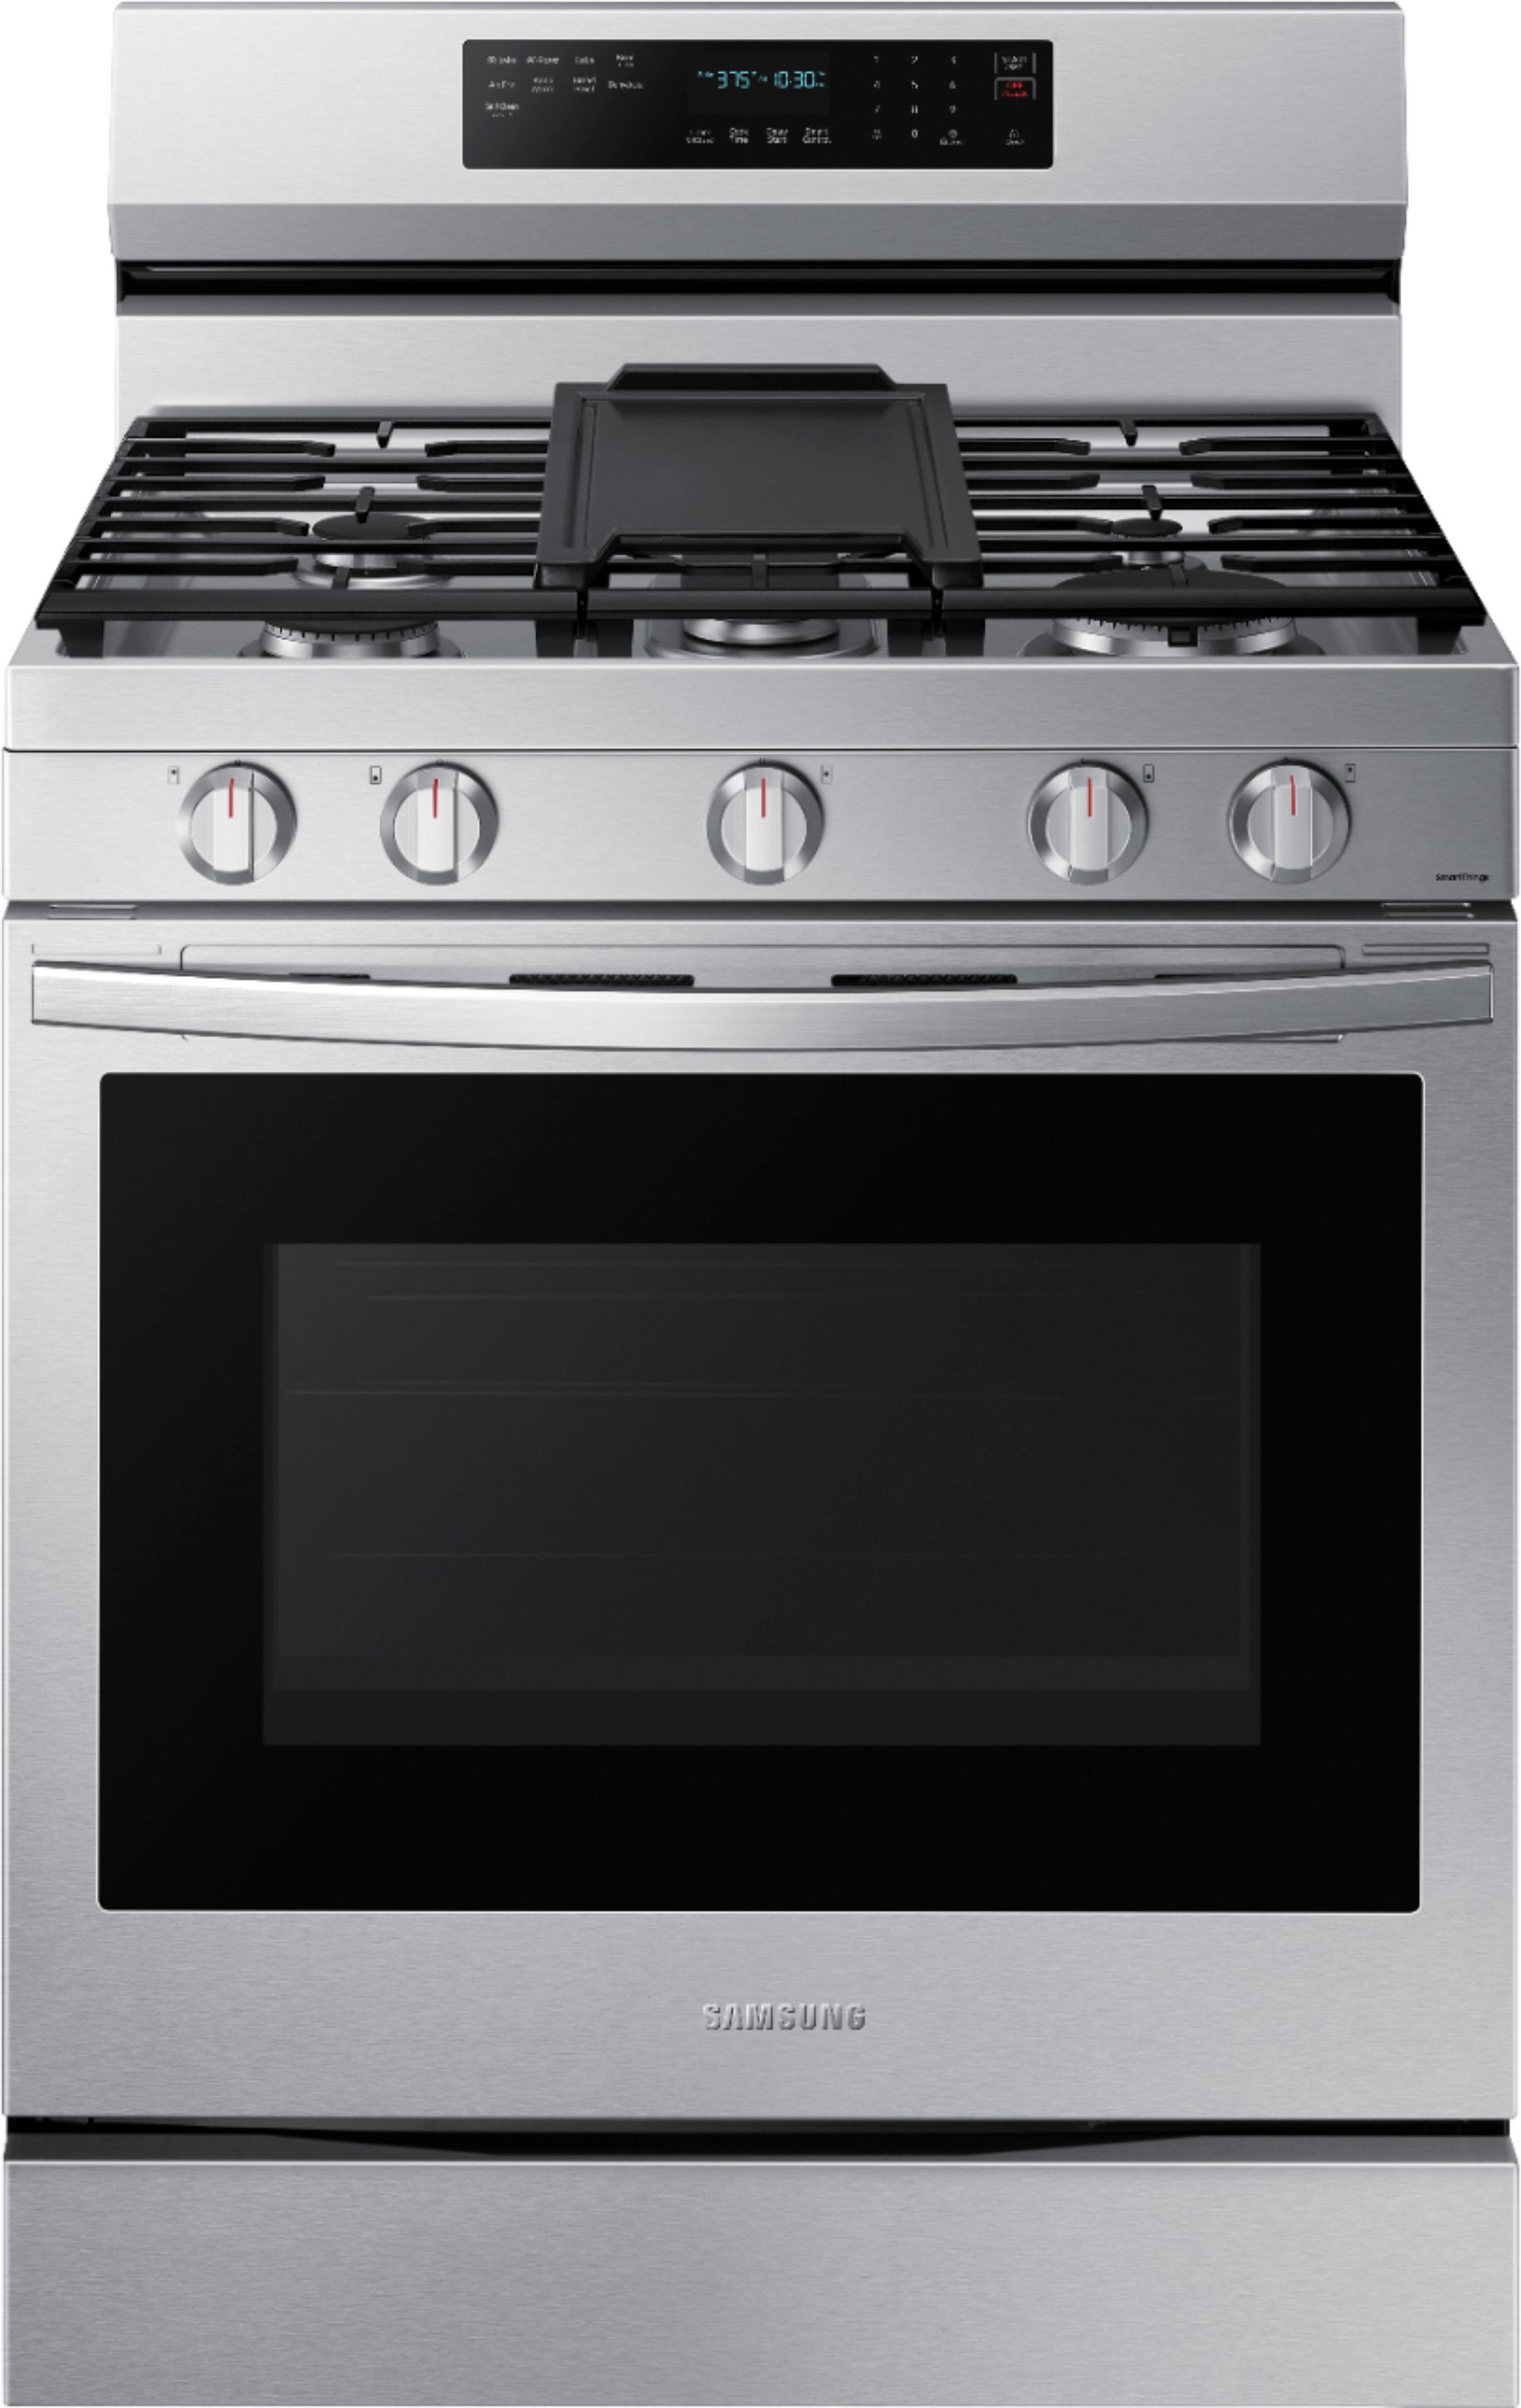 Samsung – 6.0 Cu. Ft. Freestanding Gas Convection+ Range with WiFi and No-Preheat Air Fry – Stainless steel